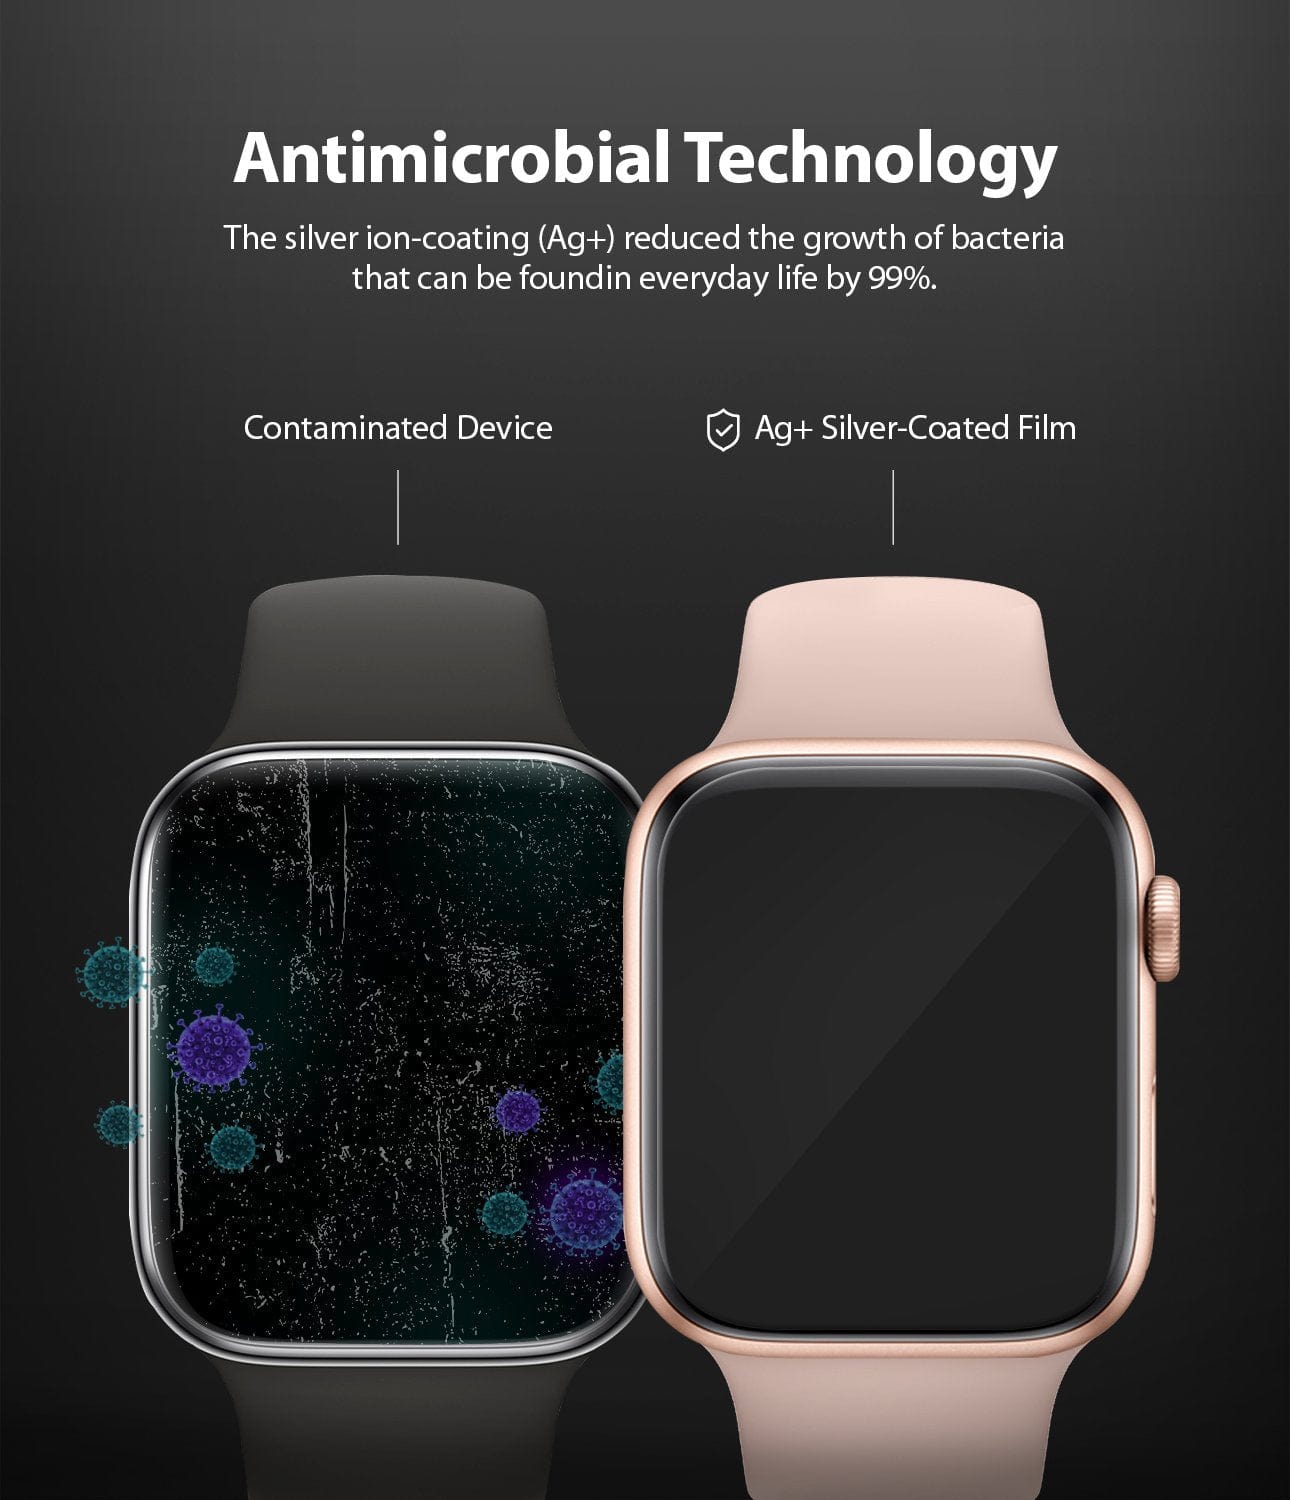 The antimicrobial technology helps reduce the growth of bacteria, promoting a cleaner environment for your device.